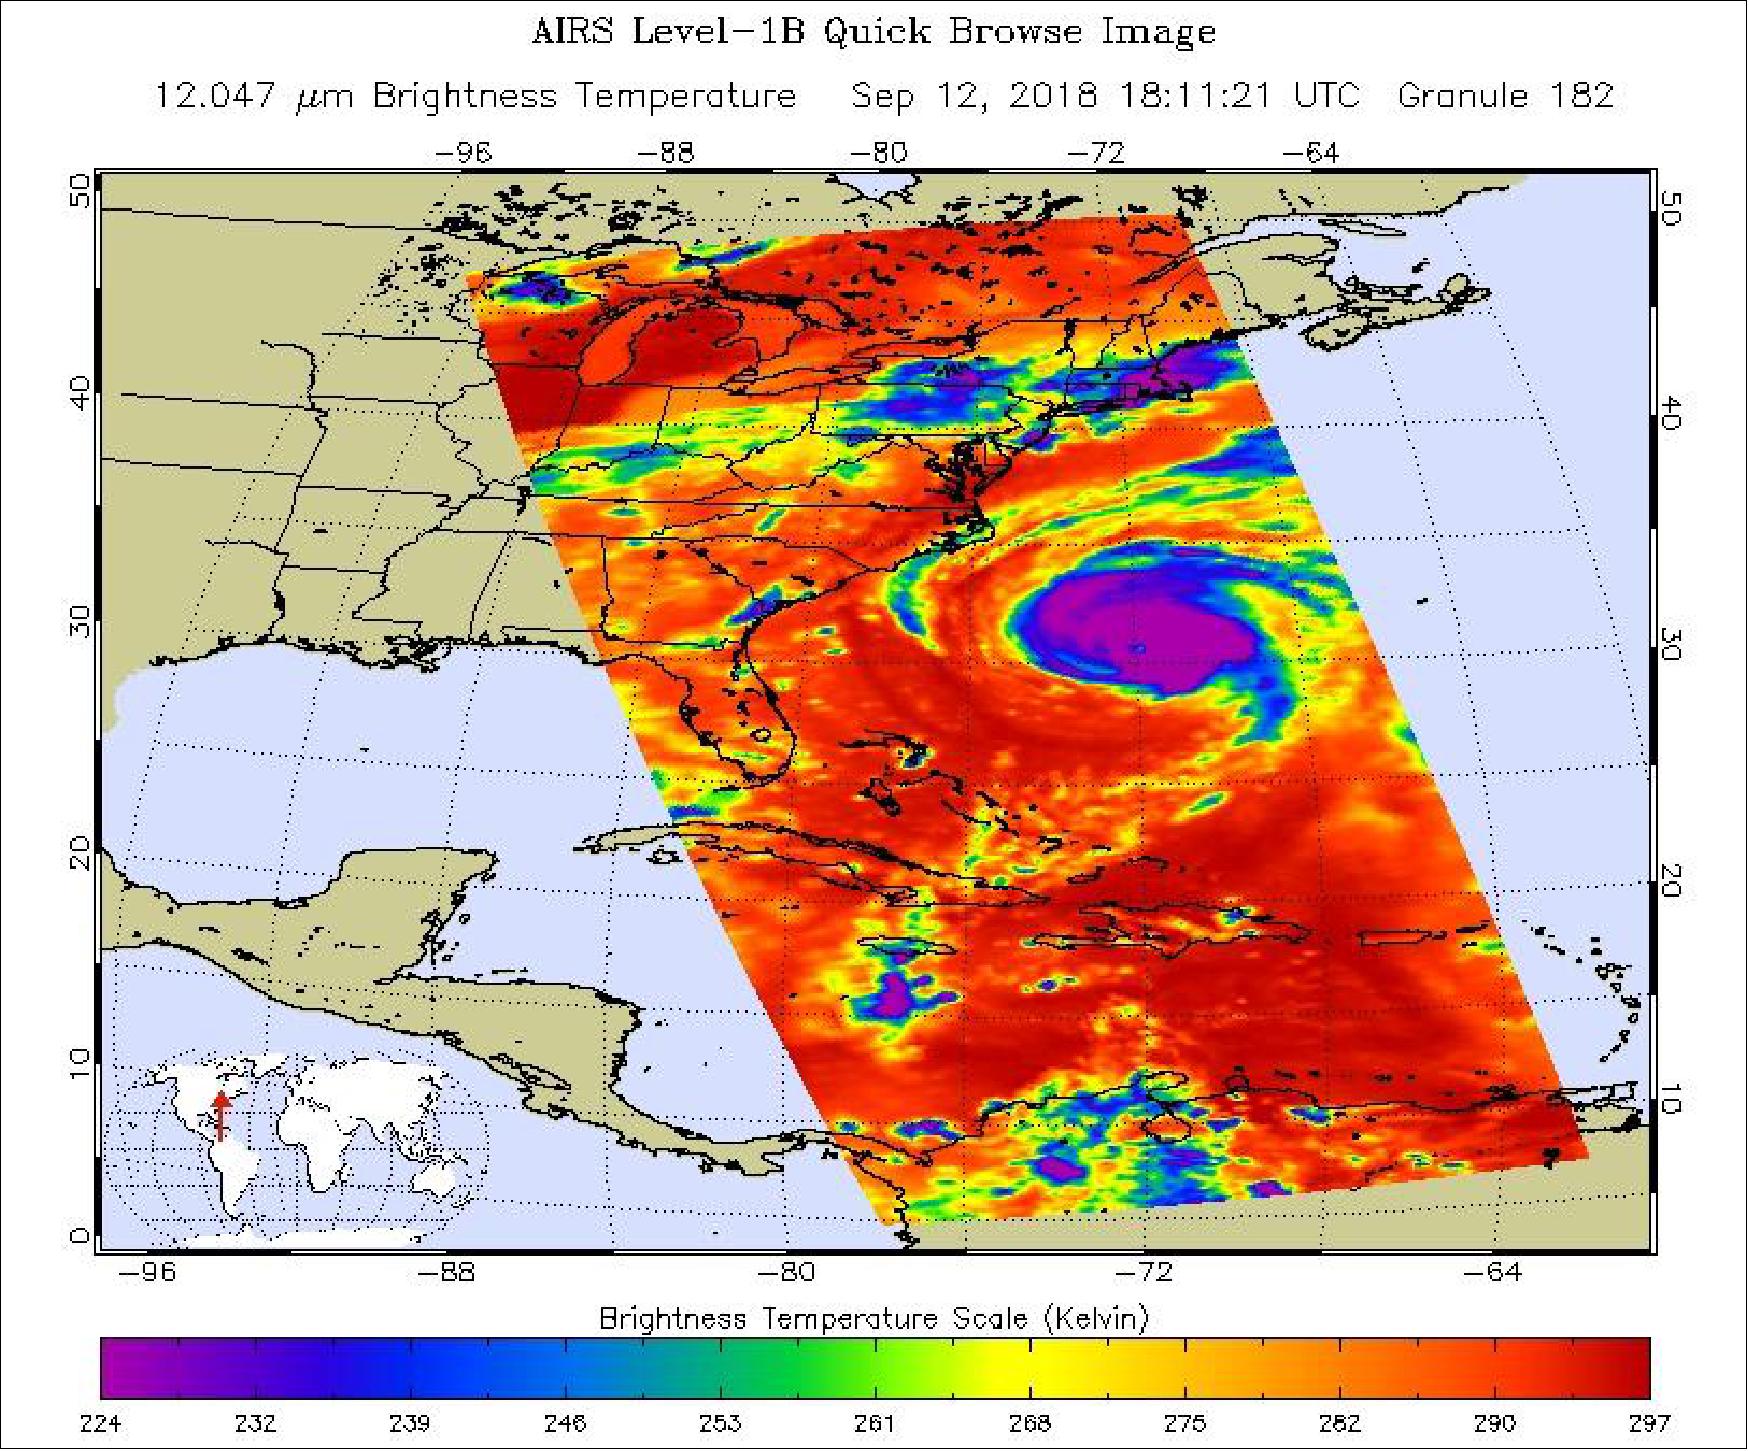 Figure 61: This image shows Hurricane Florence in infrared light, and was taken at 1:35 p.m. local time on Wednesday, September 12, 2018 by AIRS on board NASA's Aqua satellite. Florence underwent rapid intensification from Category 2 to Category 4 yesterday and was a Category 3 storm as of Wednesday evening (image credit: NASA/JPL-Caltech)